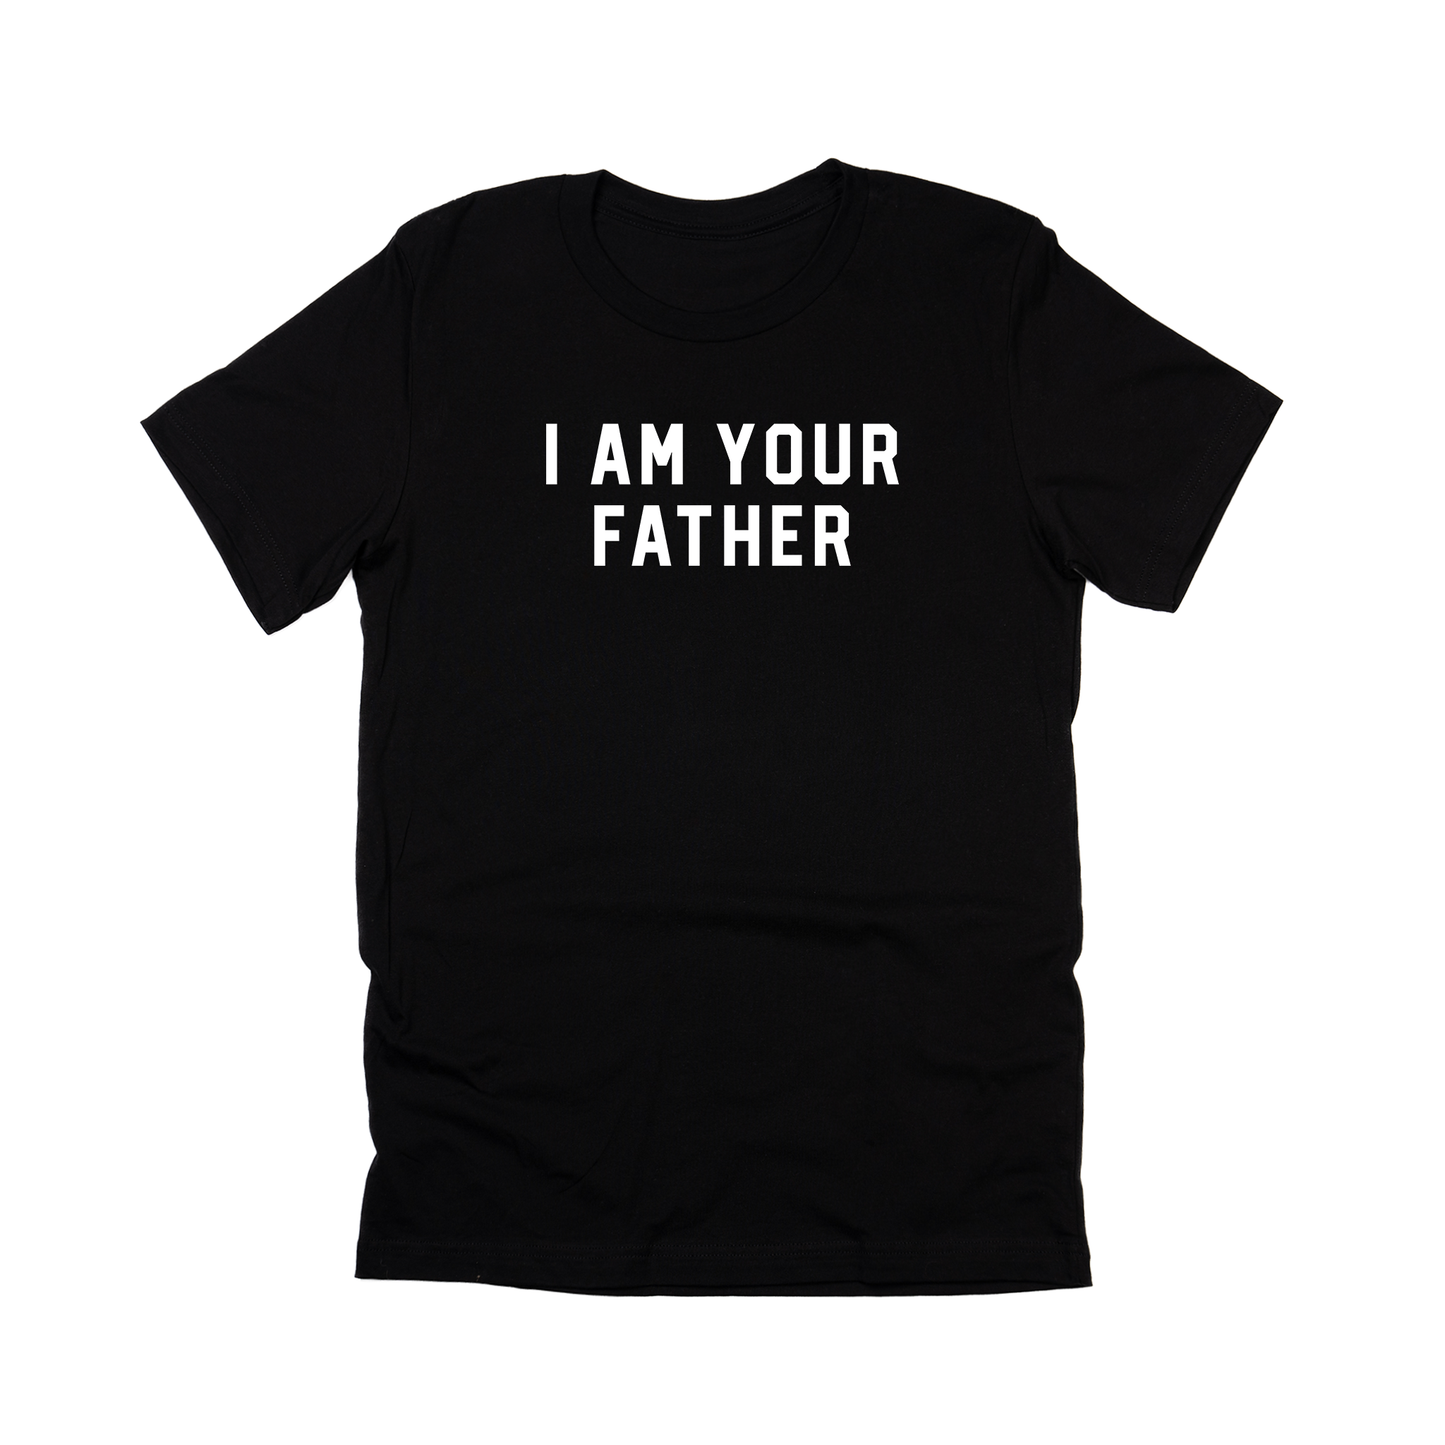 I Am Your Father (White) - Tee (Black)